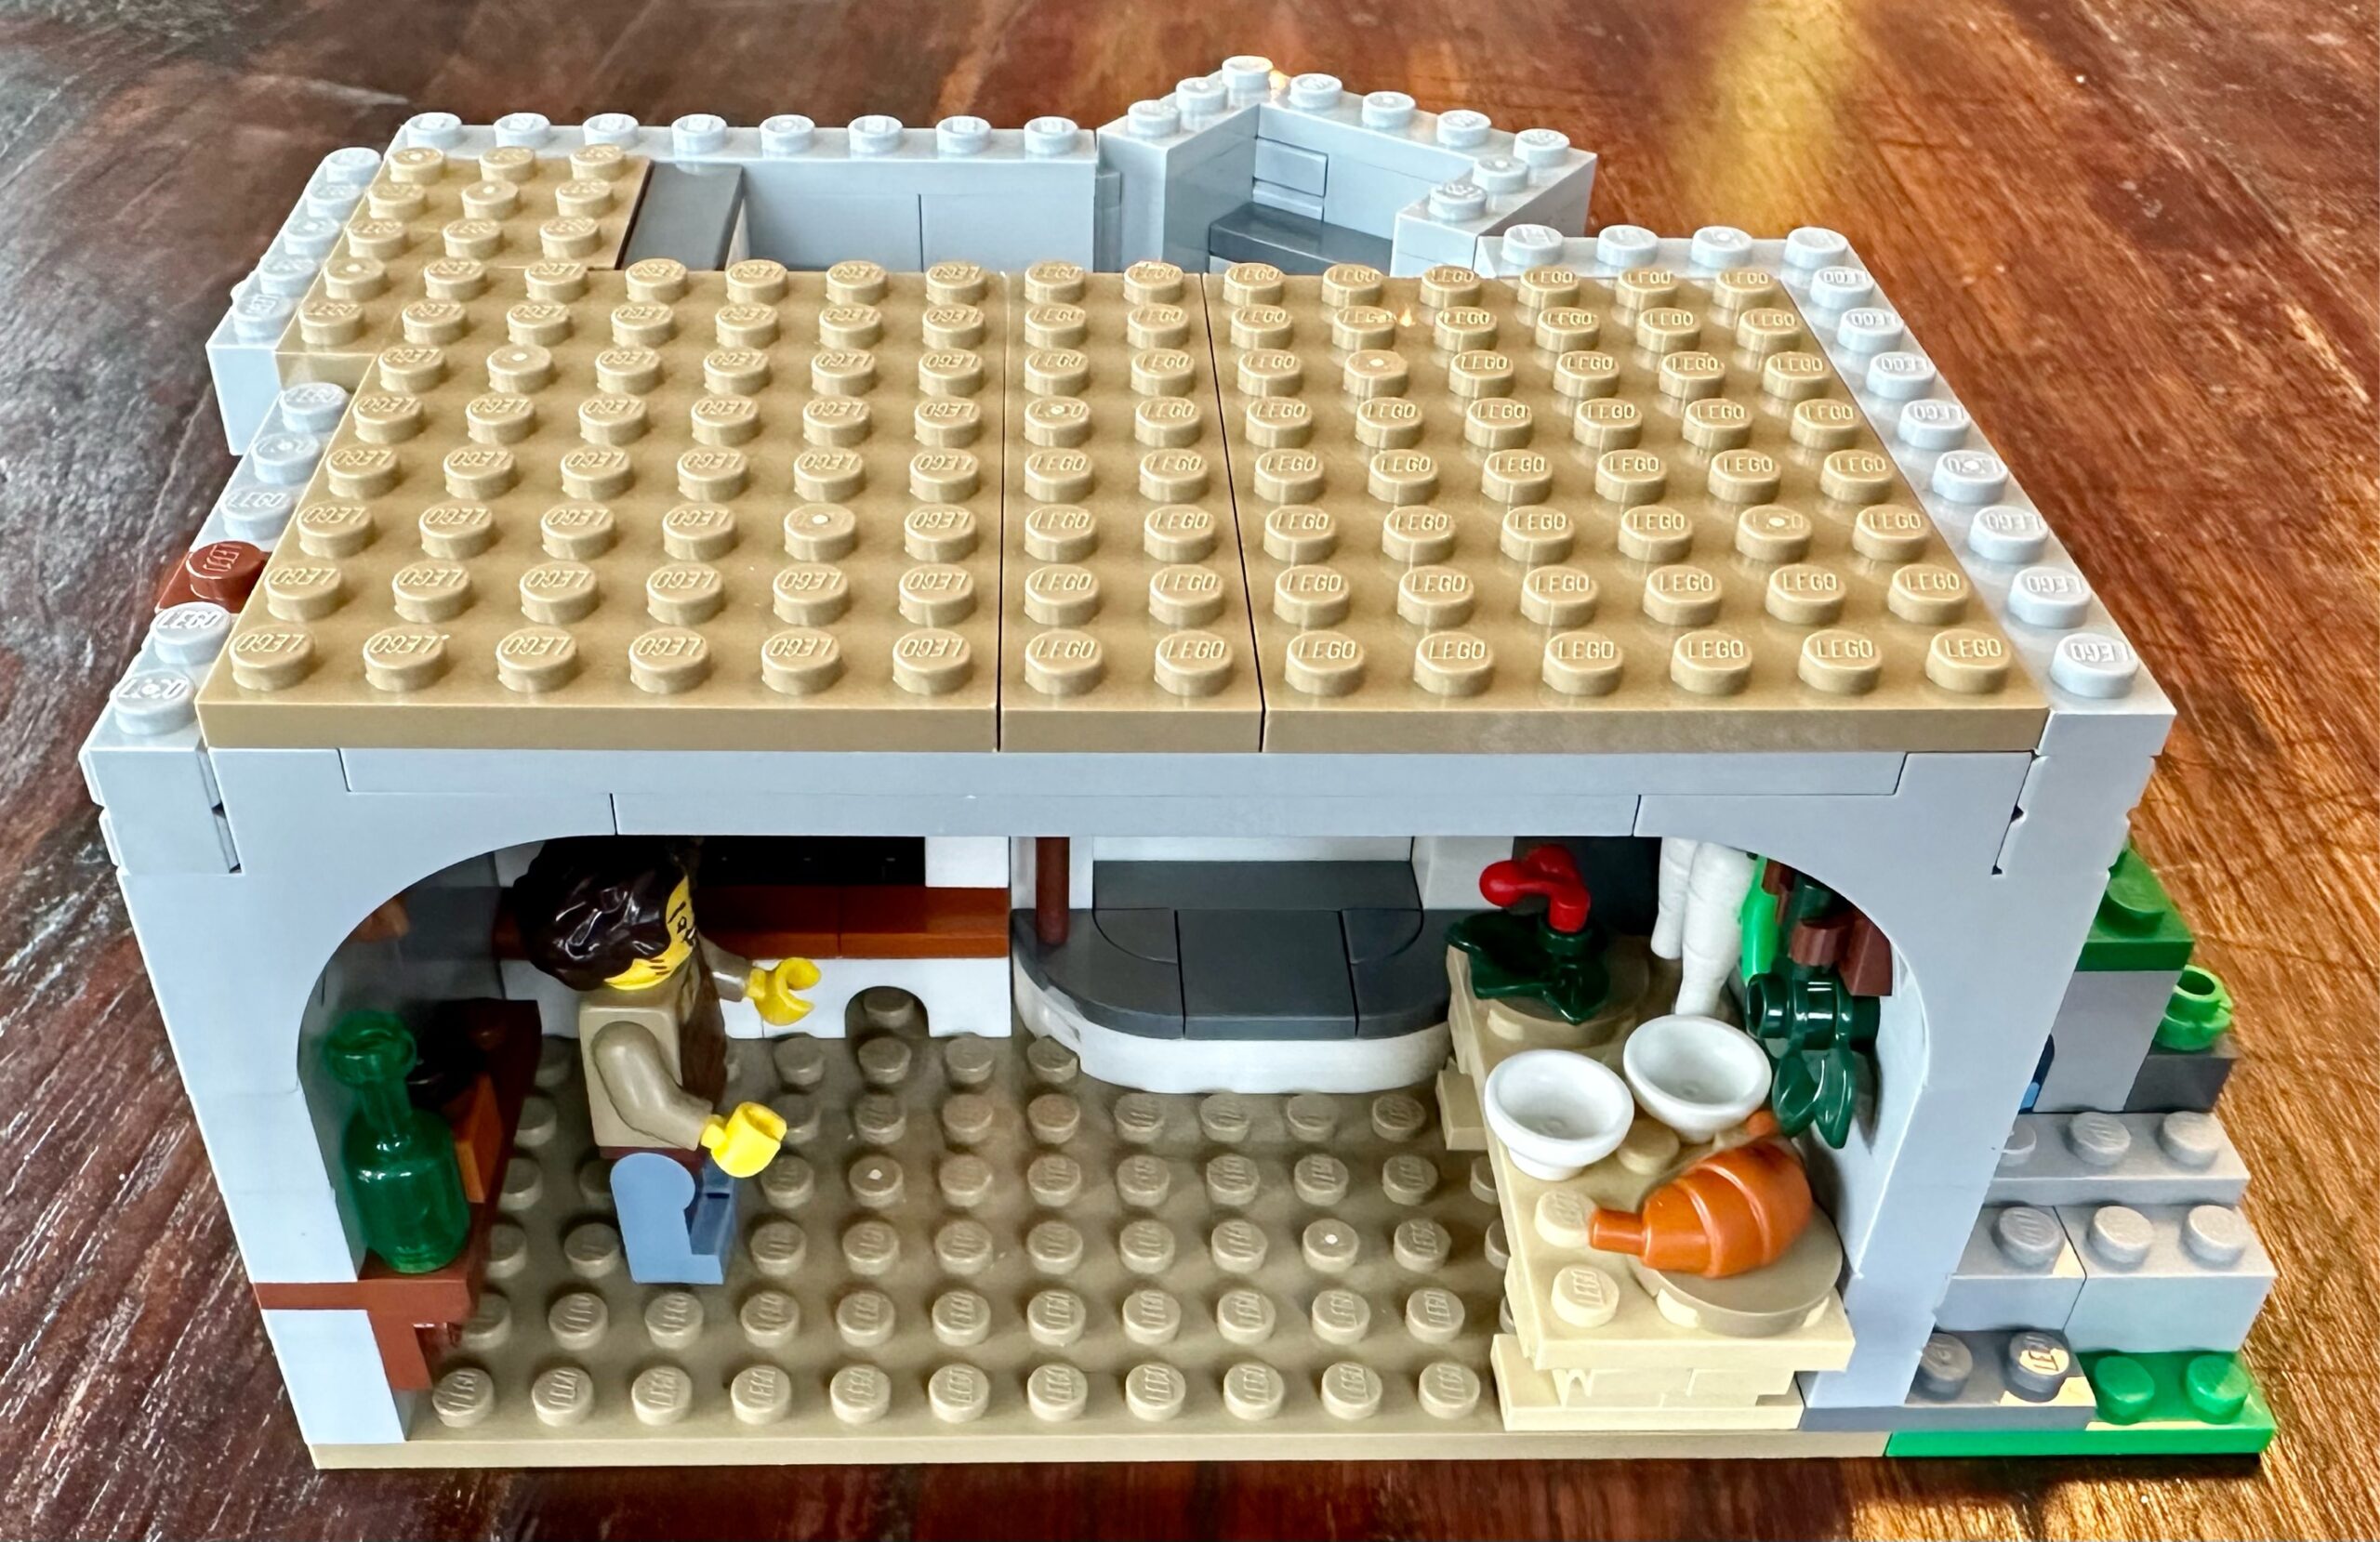 LEGO kitchen with a cook, fireplace, various utensils and food stuffs